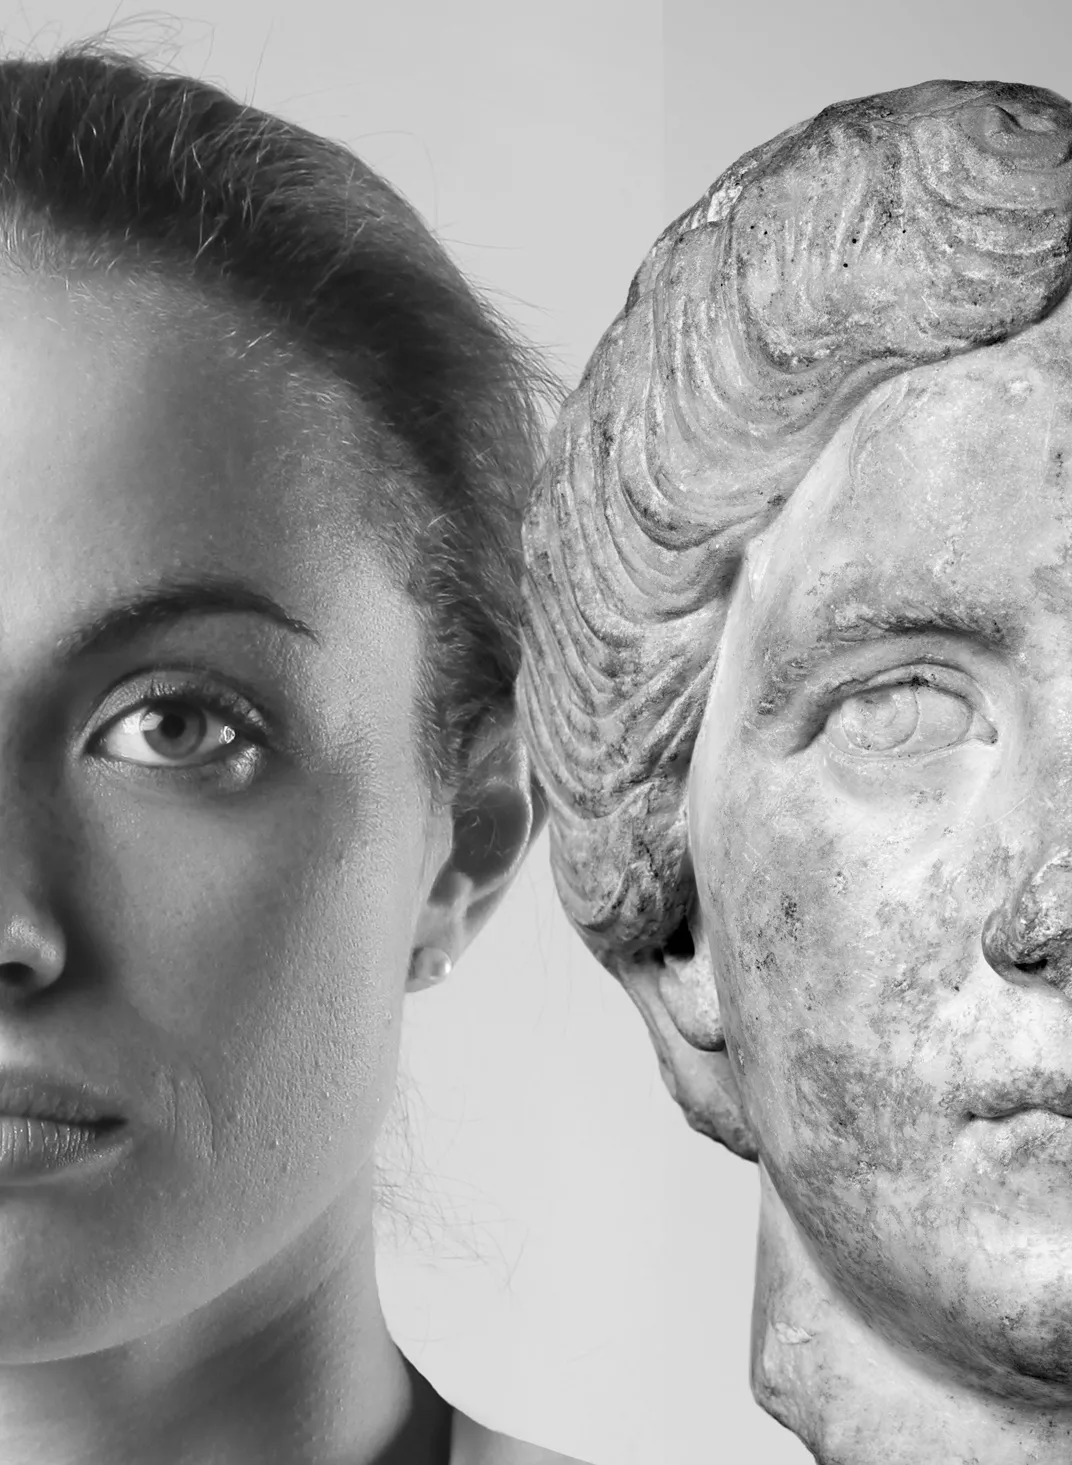 Find Your 2,000-Year-Old Doppelgänger